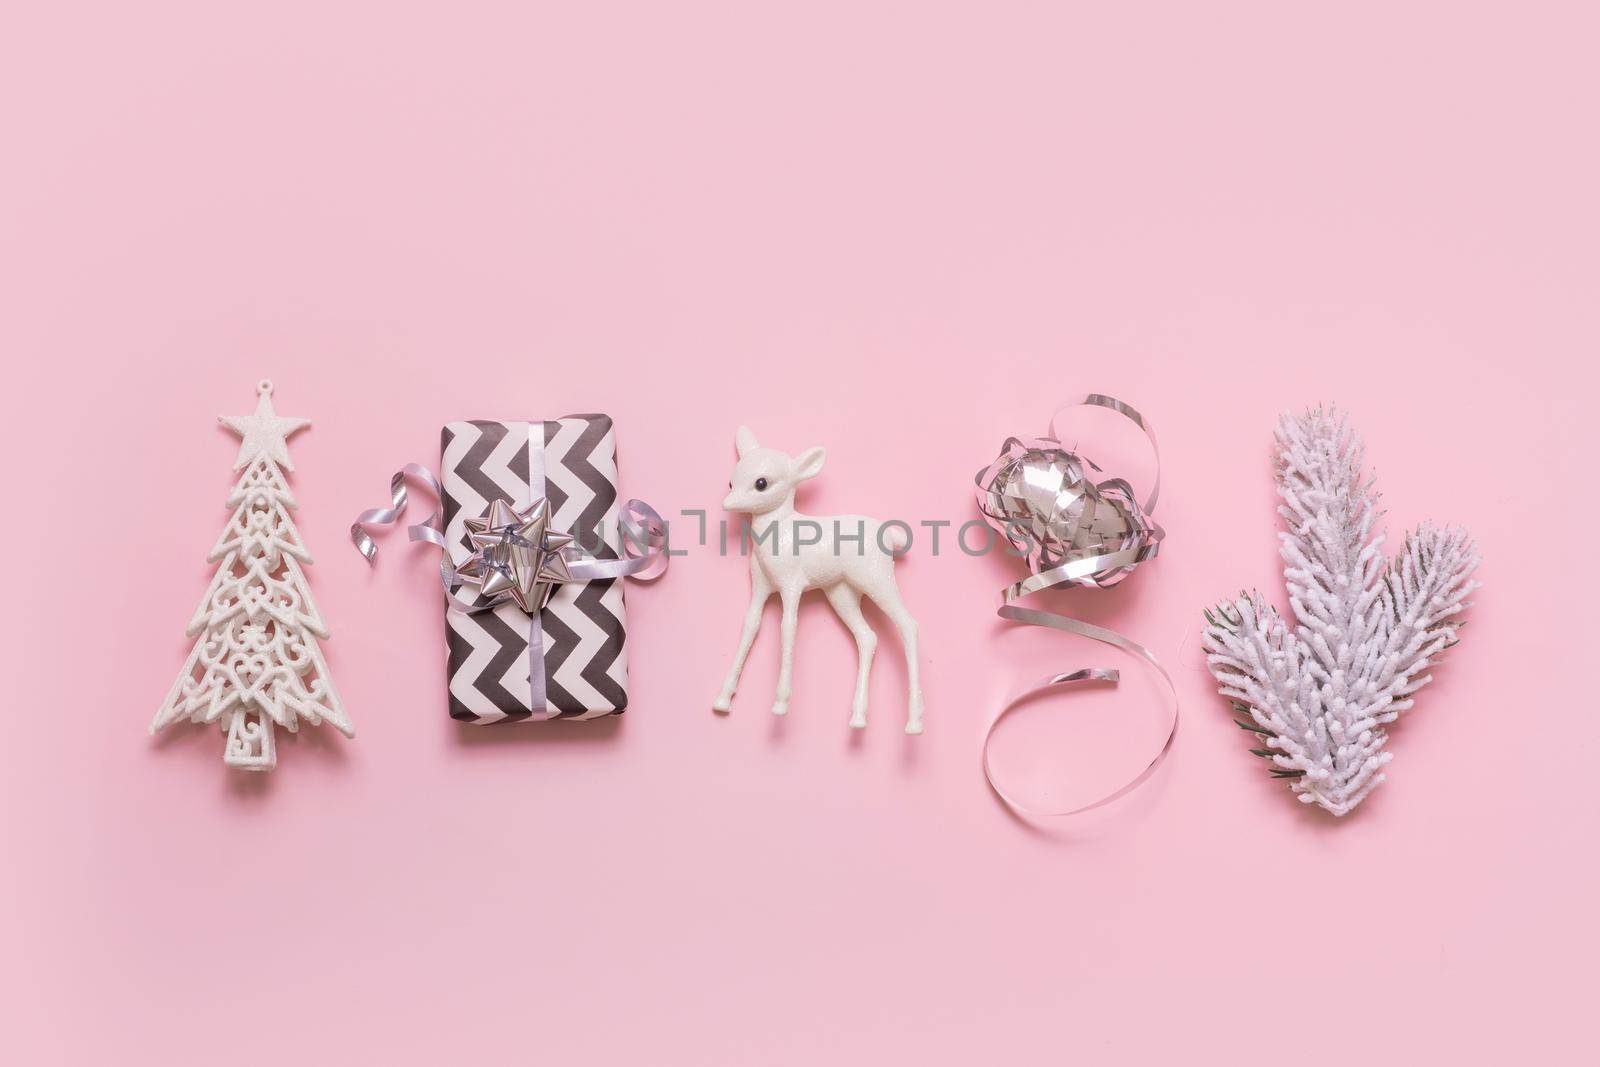 Festive minimal creative christmas composition with gift, deer, xmas tree flat lay on pink background by ssvimaliss